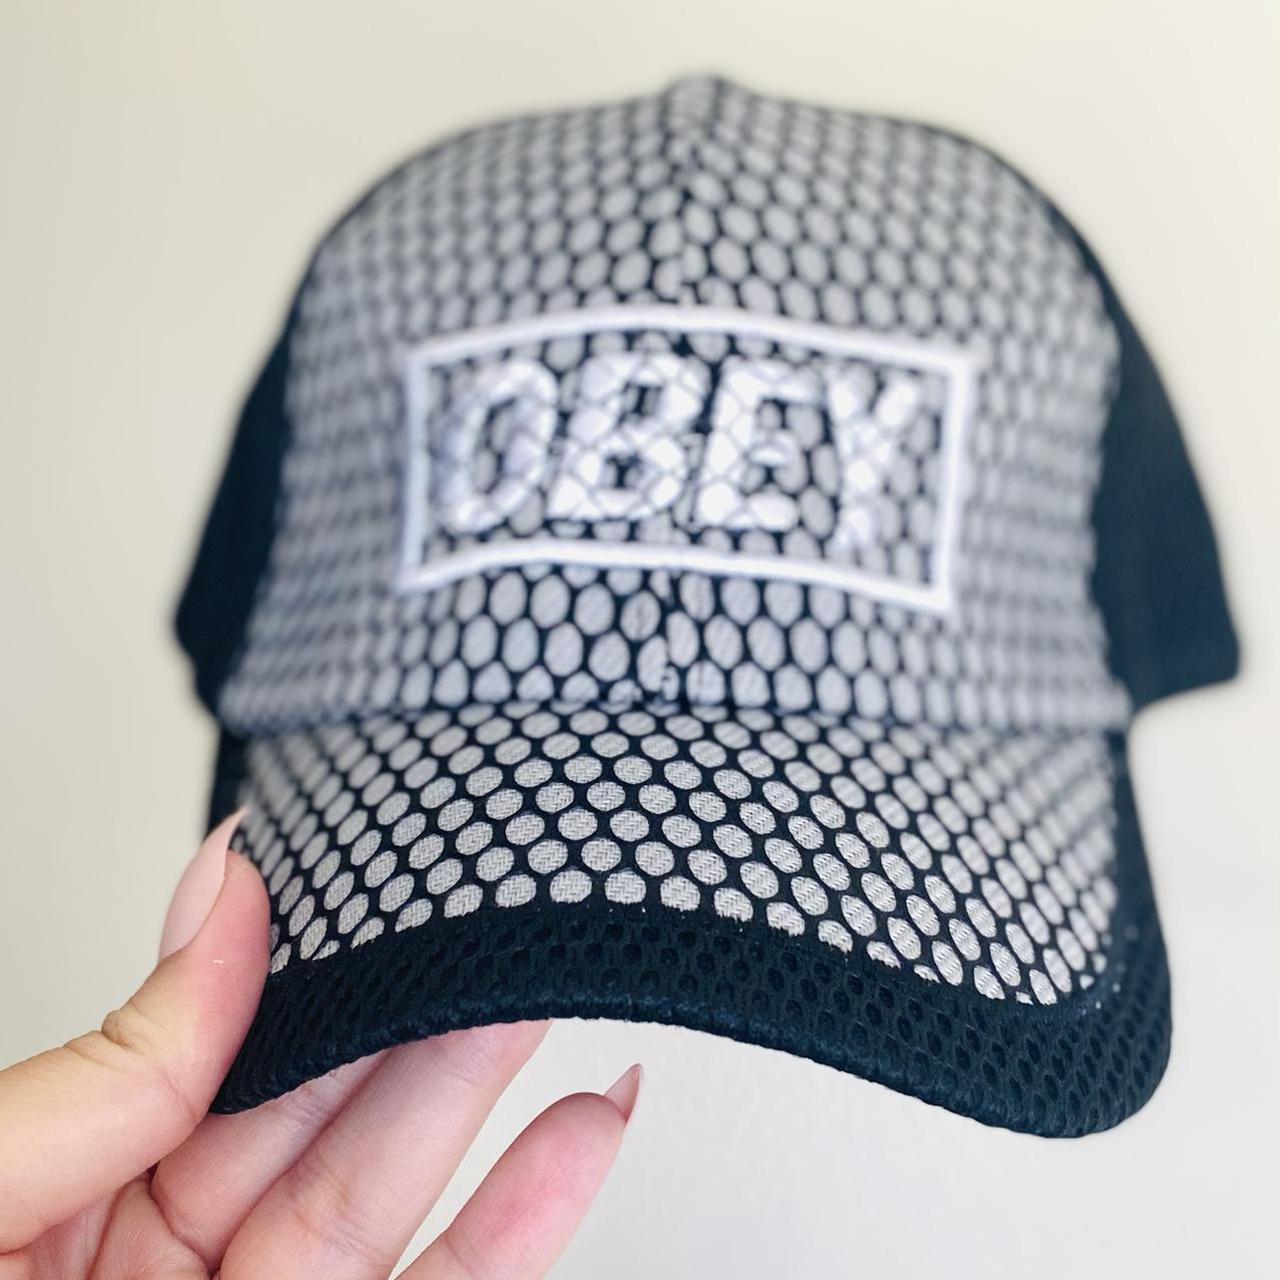 Product Image 3 - Obey hat

Never worn. Gray hat